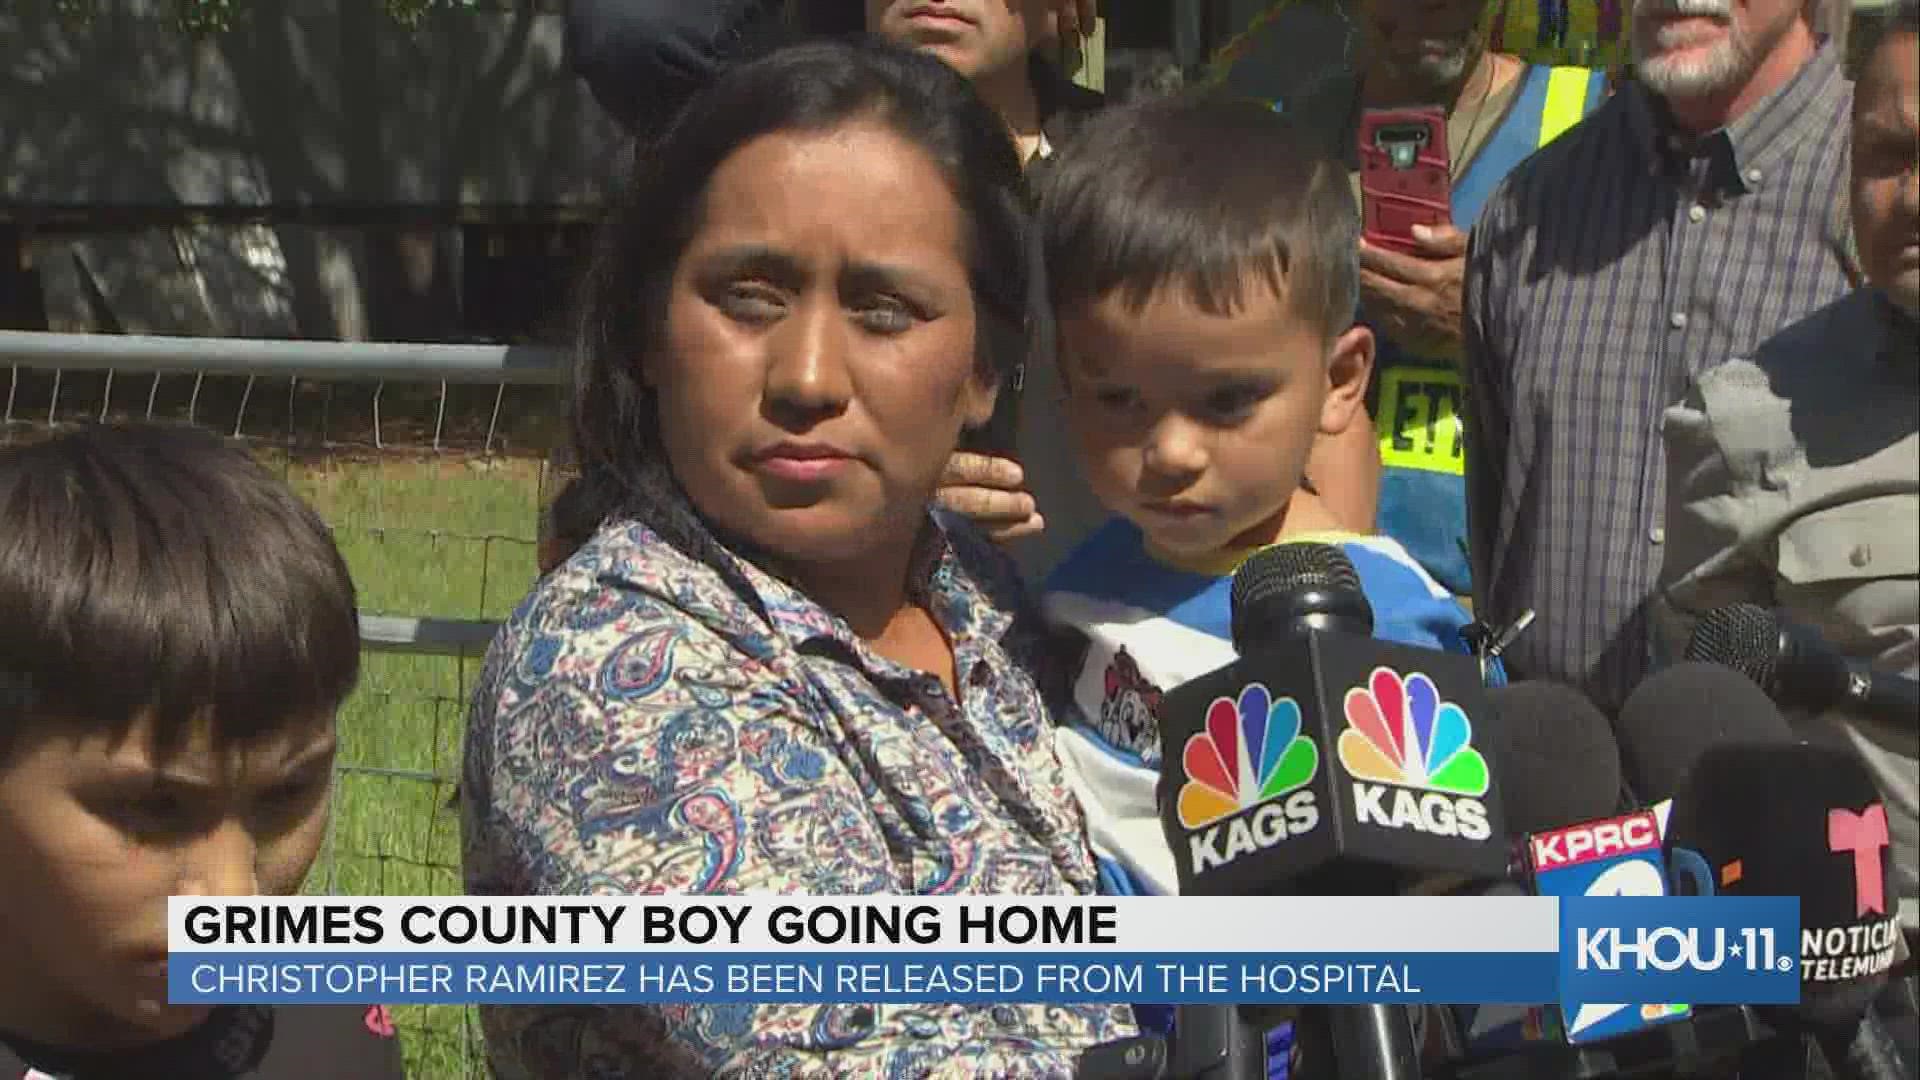 Christopher Ramirez, the Grimes County 3-year-old who was missing for nearly three days, is back home with his family after being released from hospital.